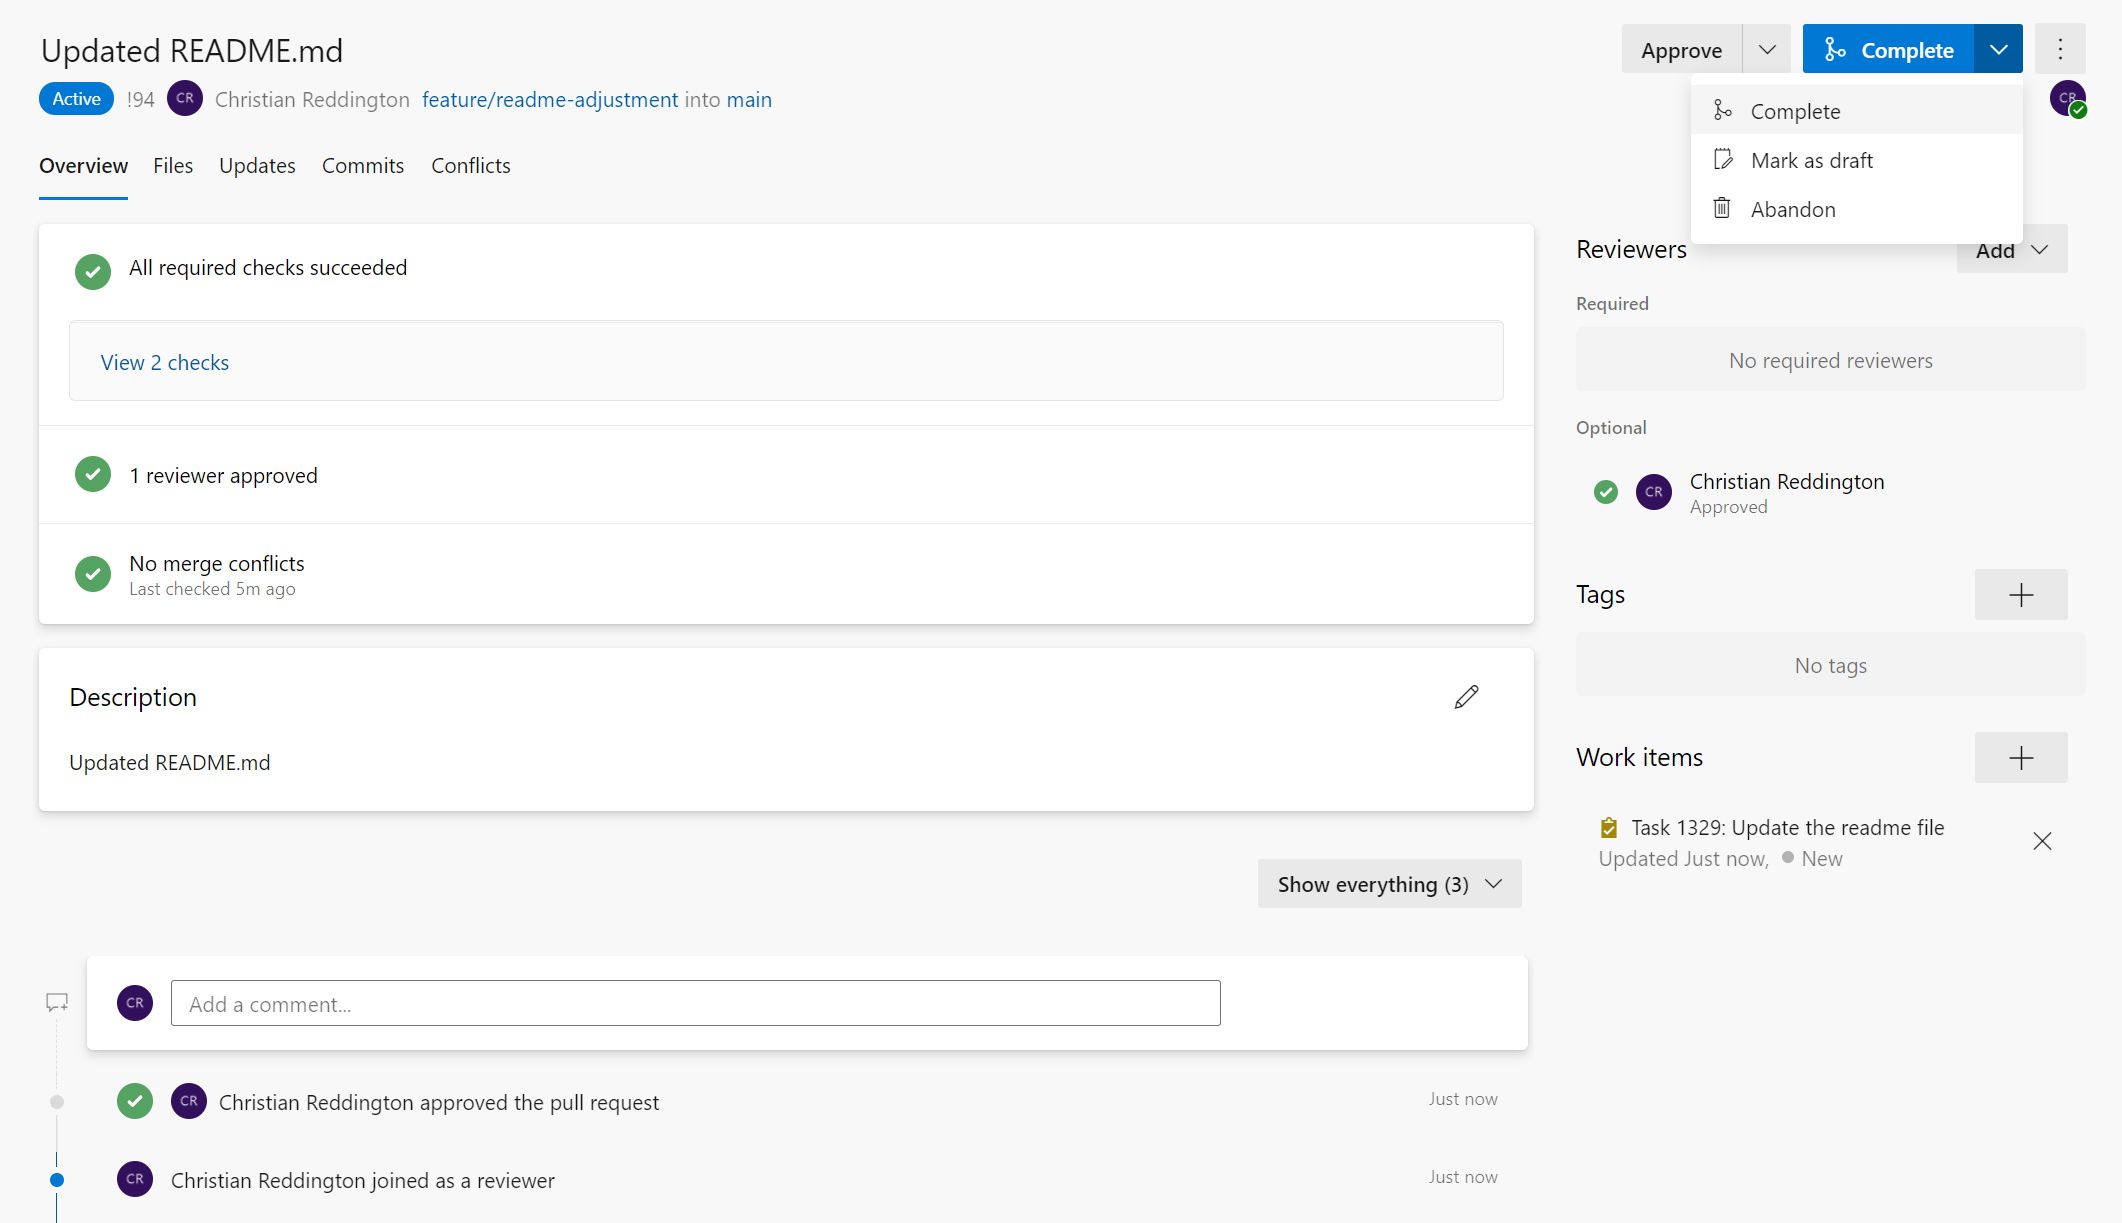 Screenshot showing that the pull request has completed all checks and is ready to be merged into the main branch.